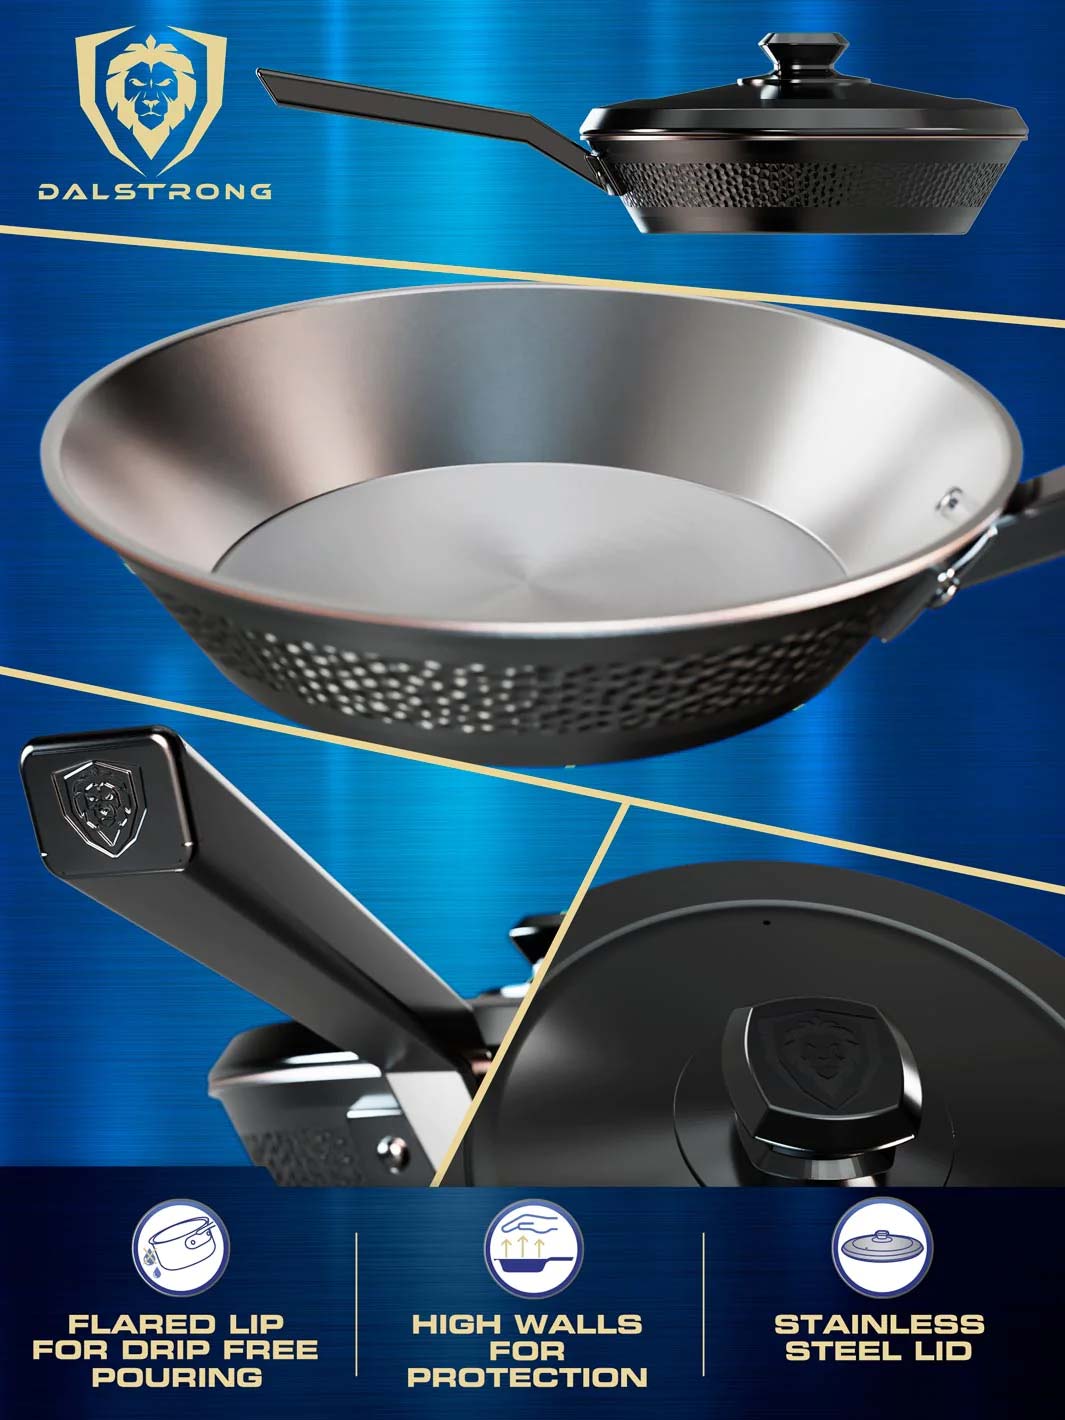 Dalstrong avalon series 10 inch frying pan and skillet hammered finish black showcasing it's high walls and stainless steel lid.